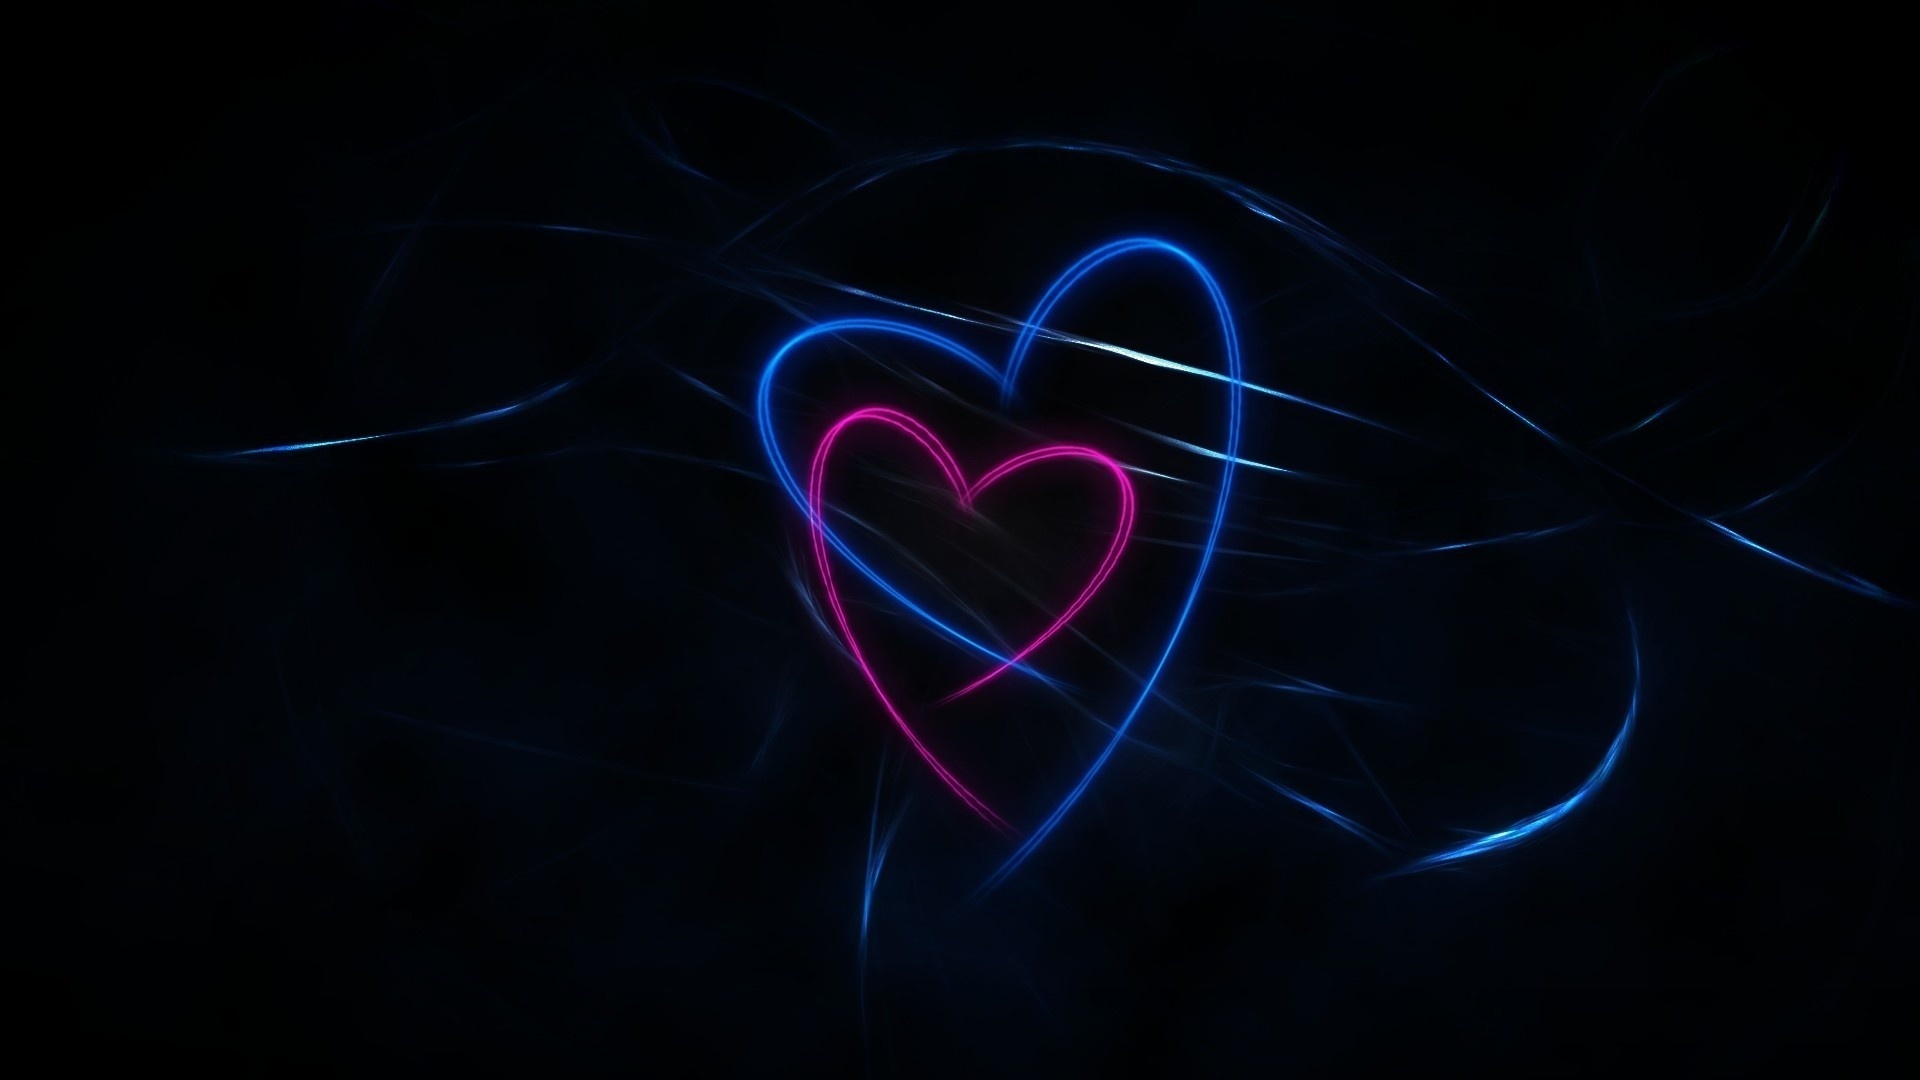 dark, Black, hearts, lines, pink, background, blue, abstraction